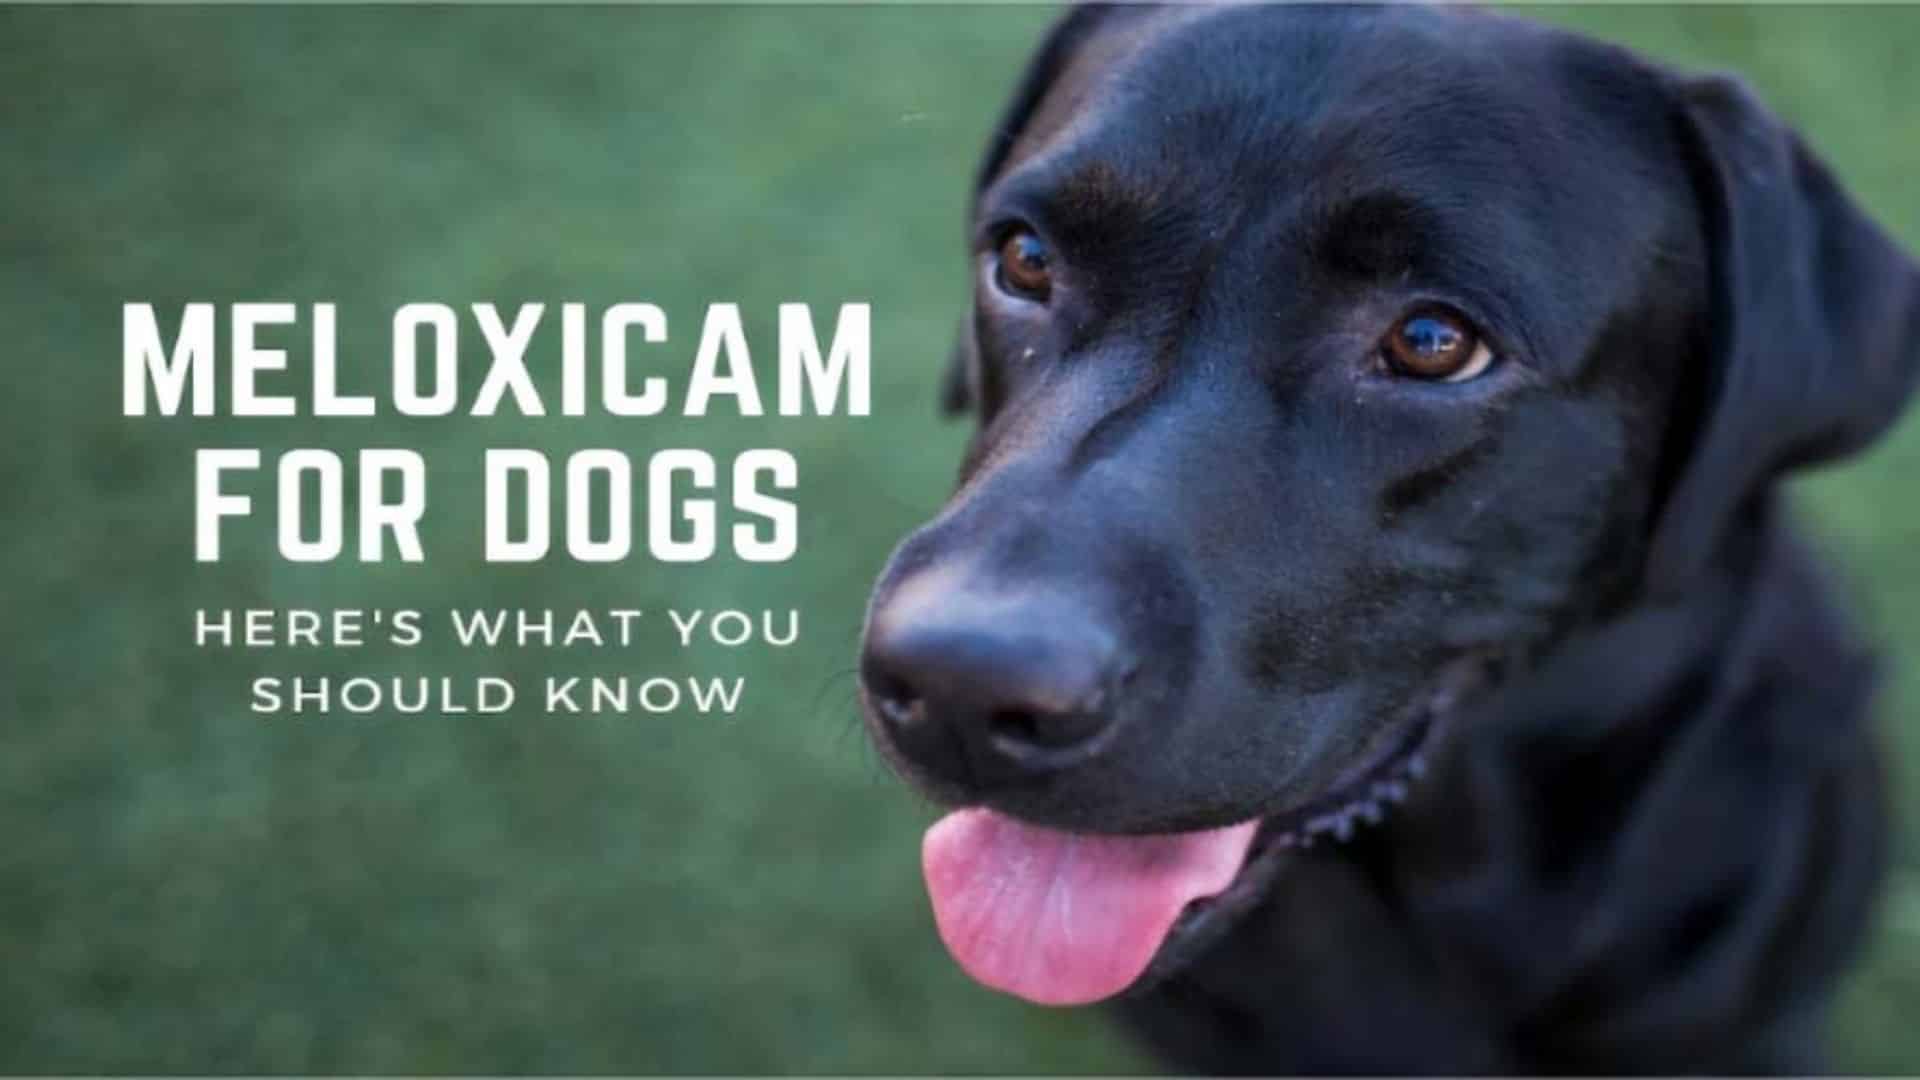 Meloxicam for Dogs: Dosage, Uses, Benefits & Side Effects